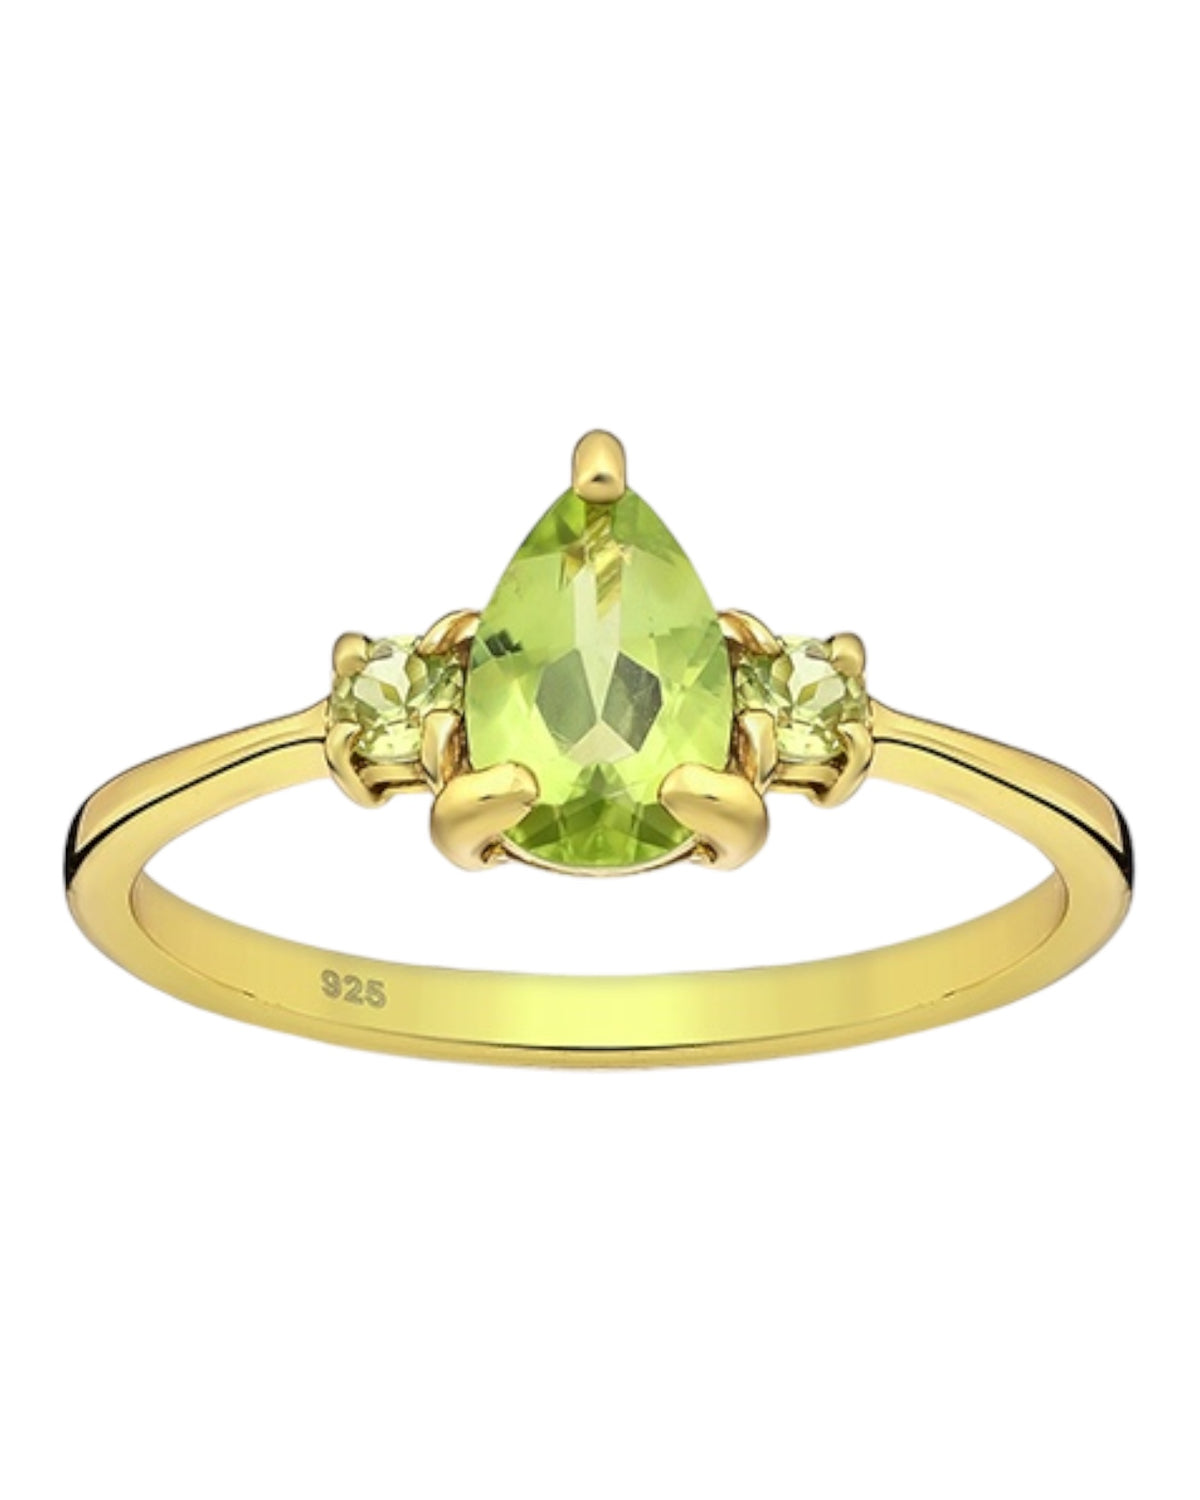 peridot rings, peridot jewelry, trending jewelry, nice rings, white gold rings, real sterling silver rings, real peridot rings, august birthstone rings, gift ideas for leos, leo birthstone, lime green crystal, nice jewelry with crystals, cute birthstone rings, luxury birthstone rings, kesley jewelry, viral jewelry, viral fashion, waterproof rings, waterproof jewelry, gold plated rings, gold peridot rings 